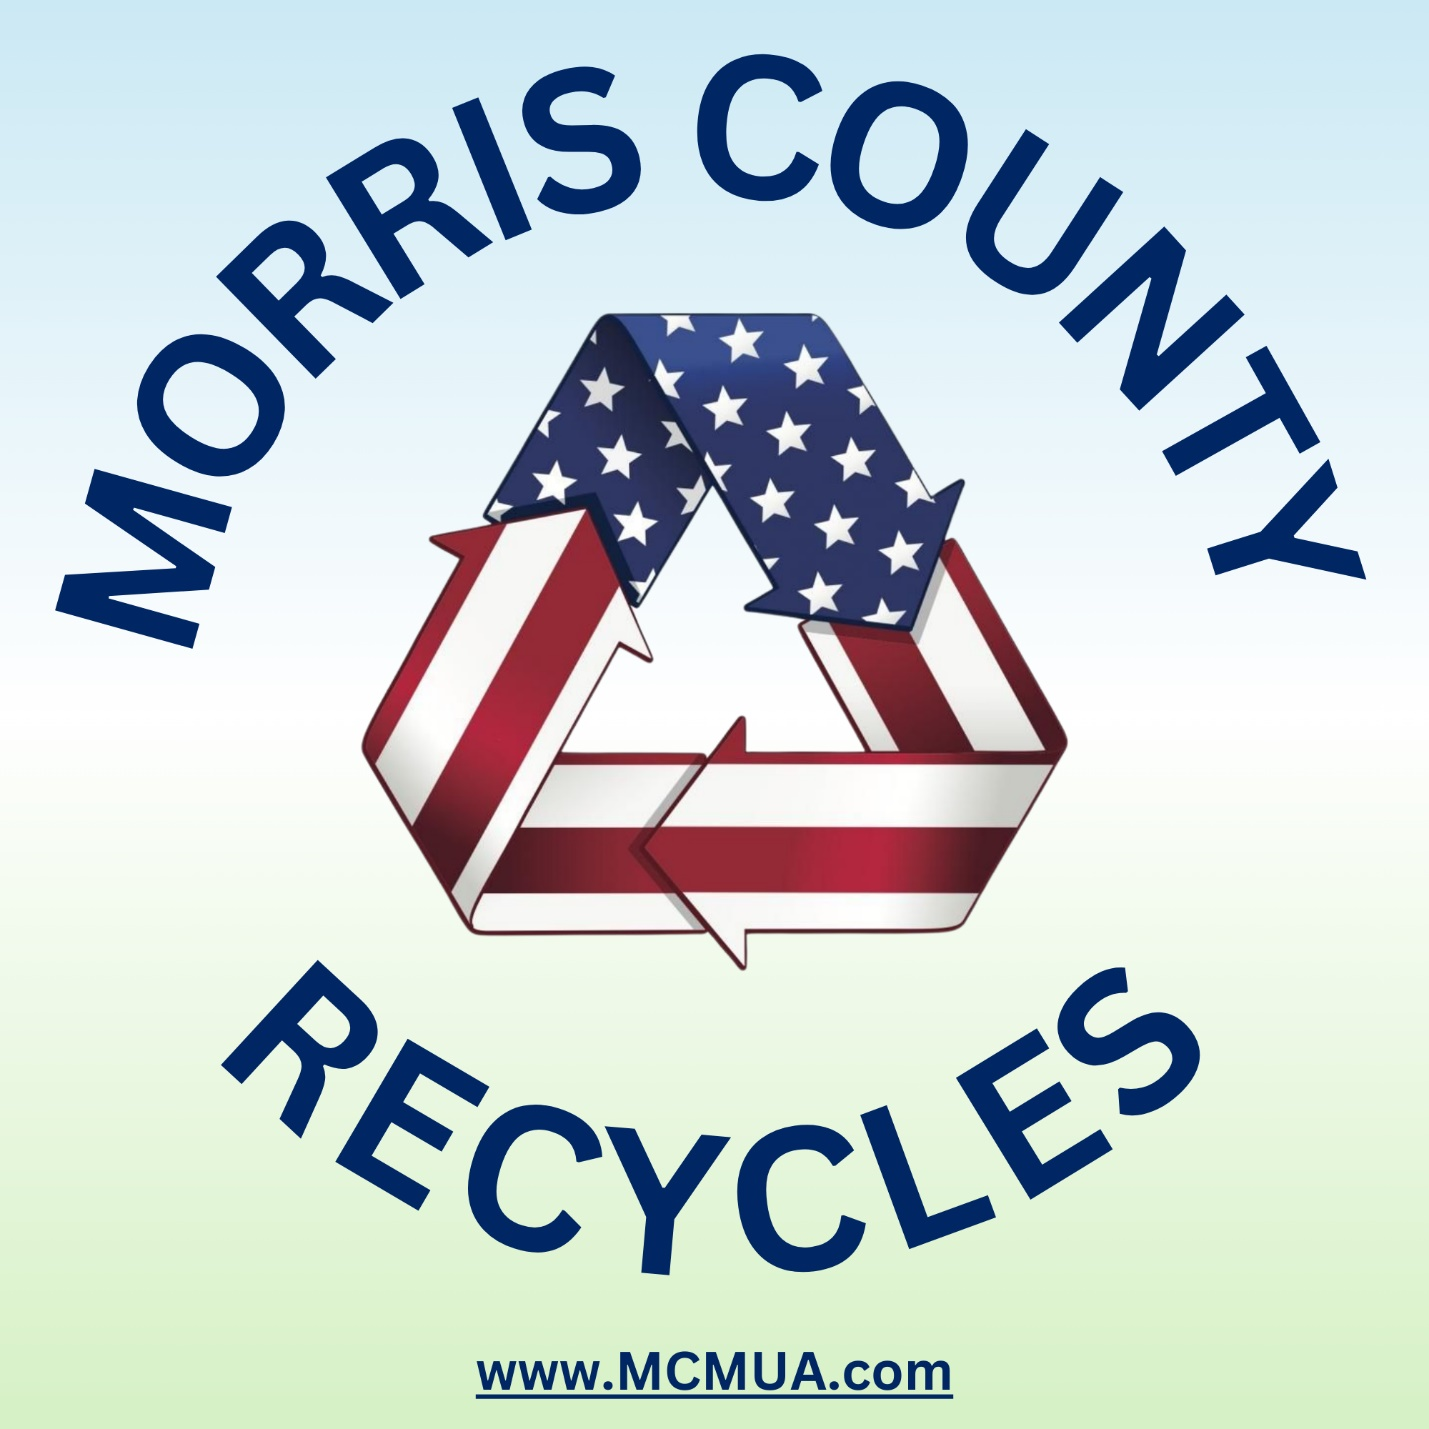 image of Morris County Recycling Stars and Stripes